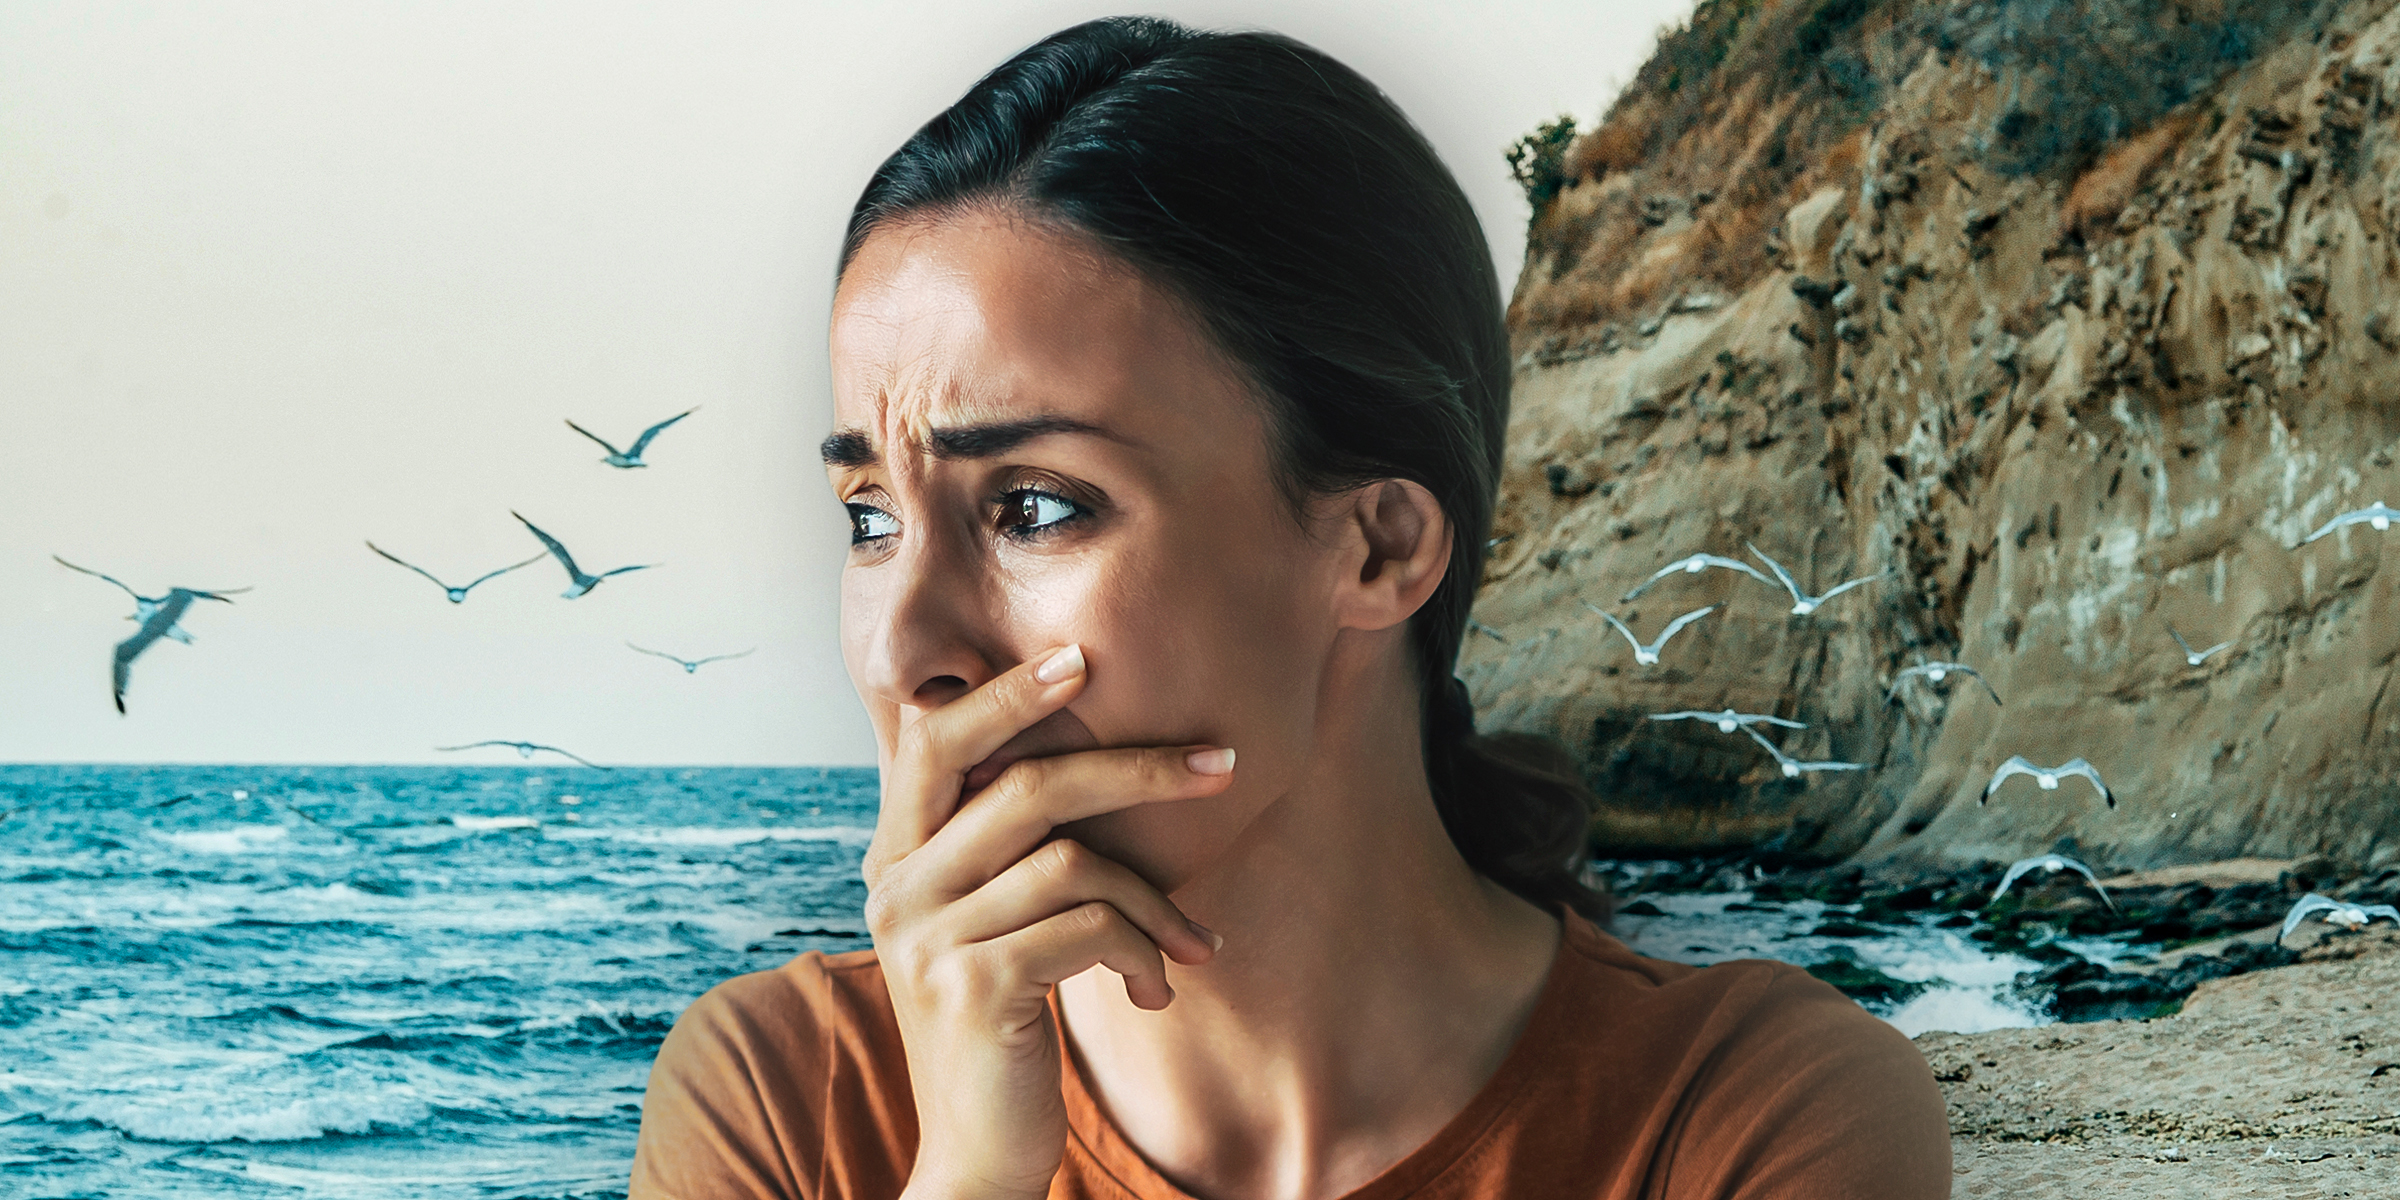 A woman looking distressed at the beach | Source: Shutterstock